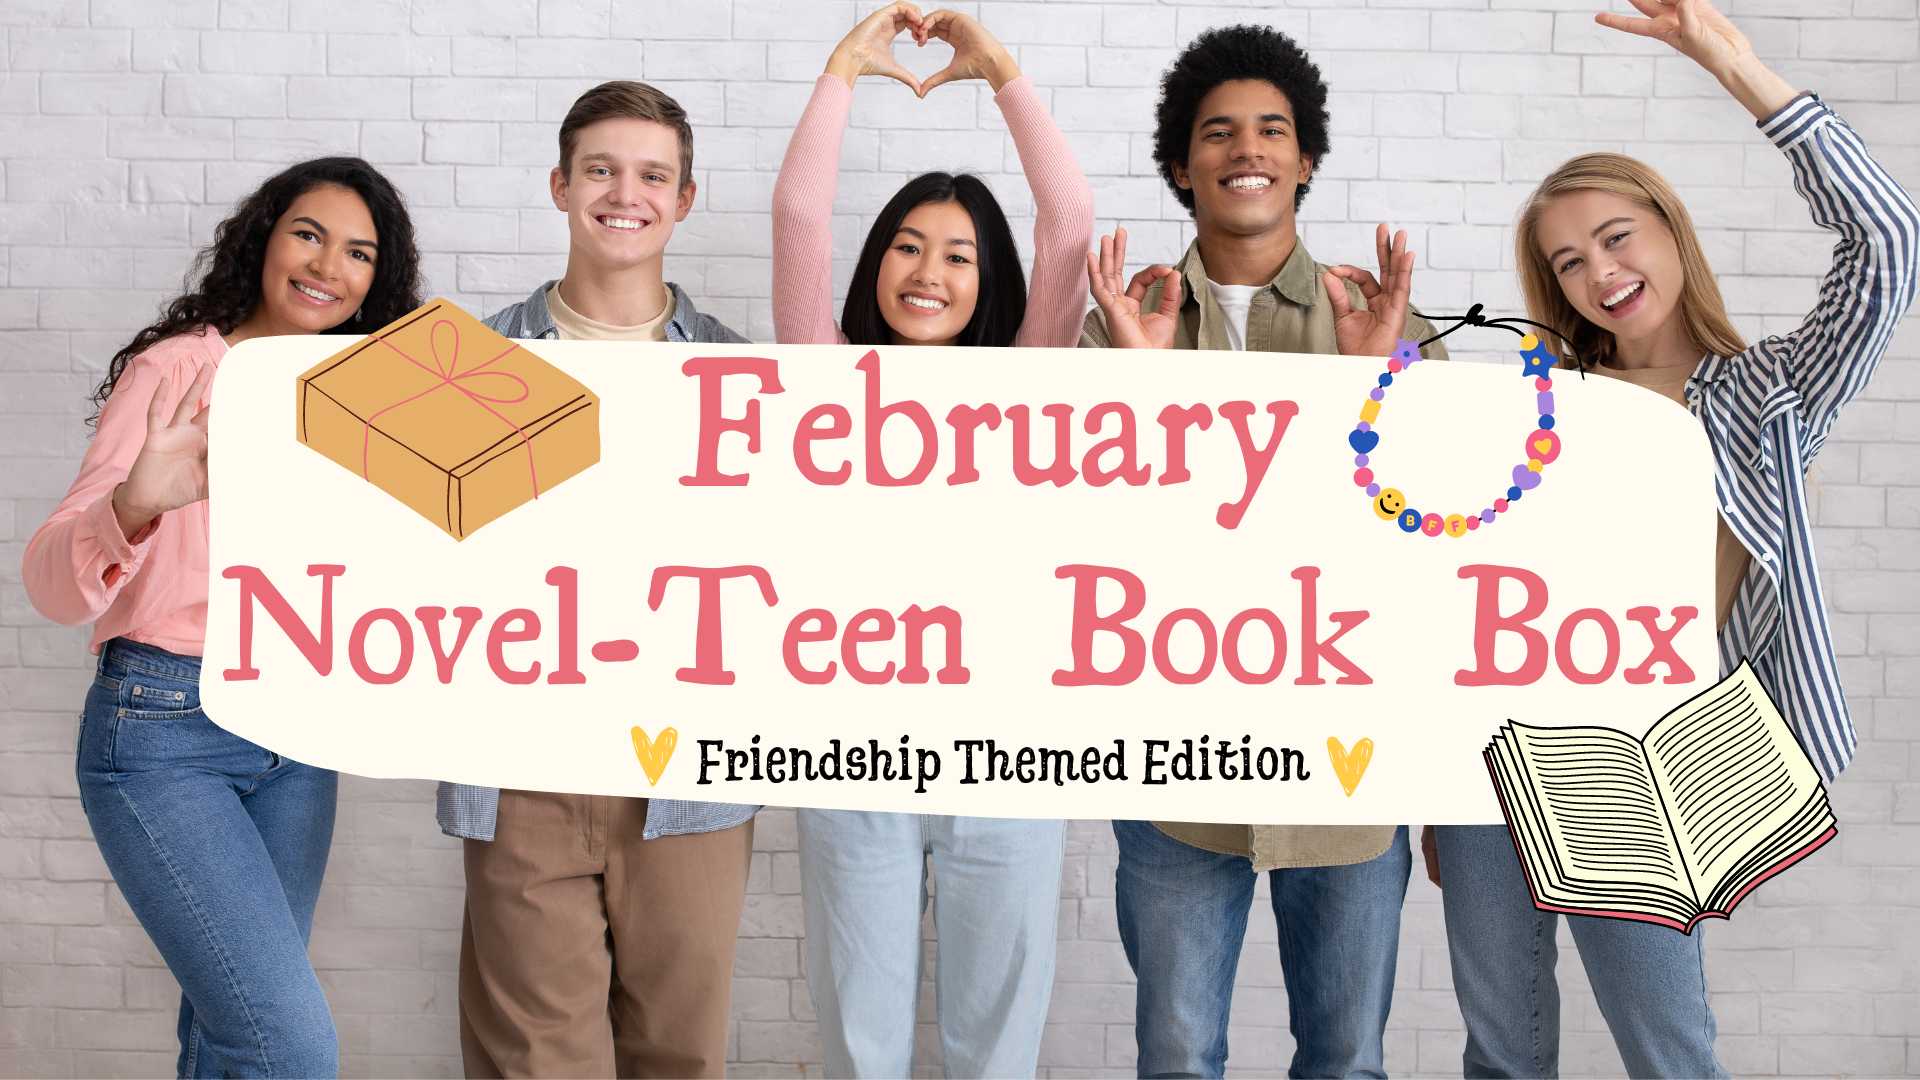 February Novel-Teen Book Box: Friendship Themed Edition; photo of a group of smiling teenagers posing for a picture.